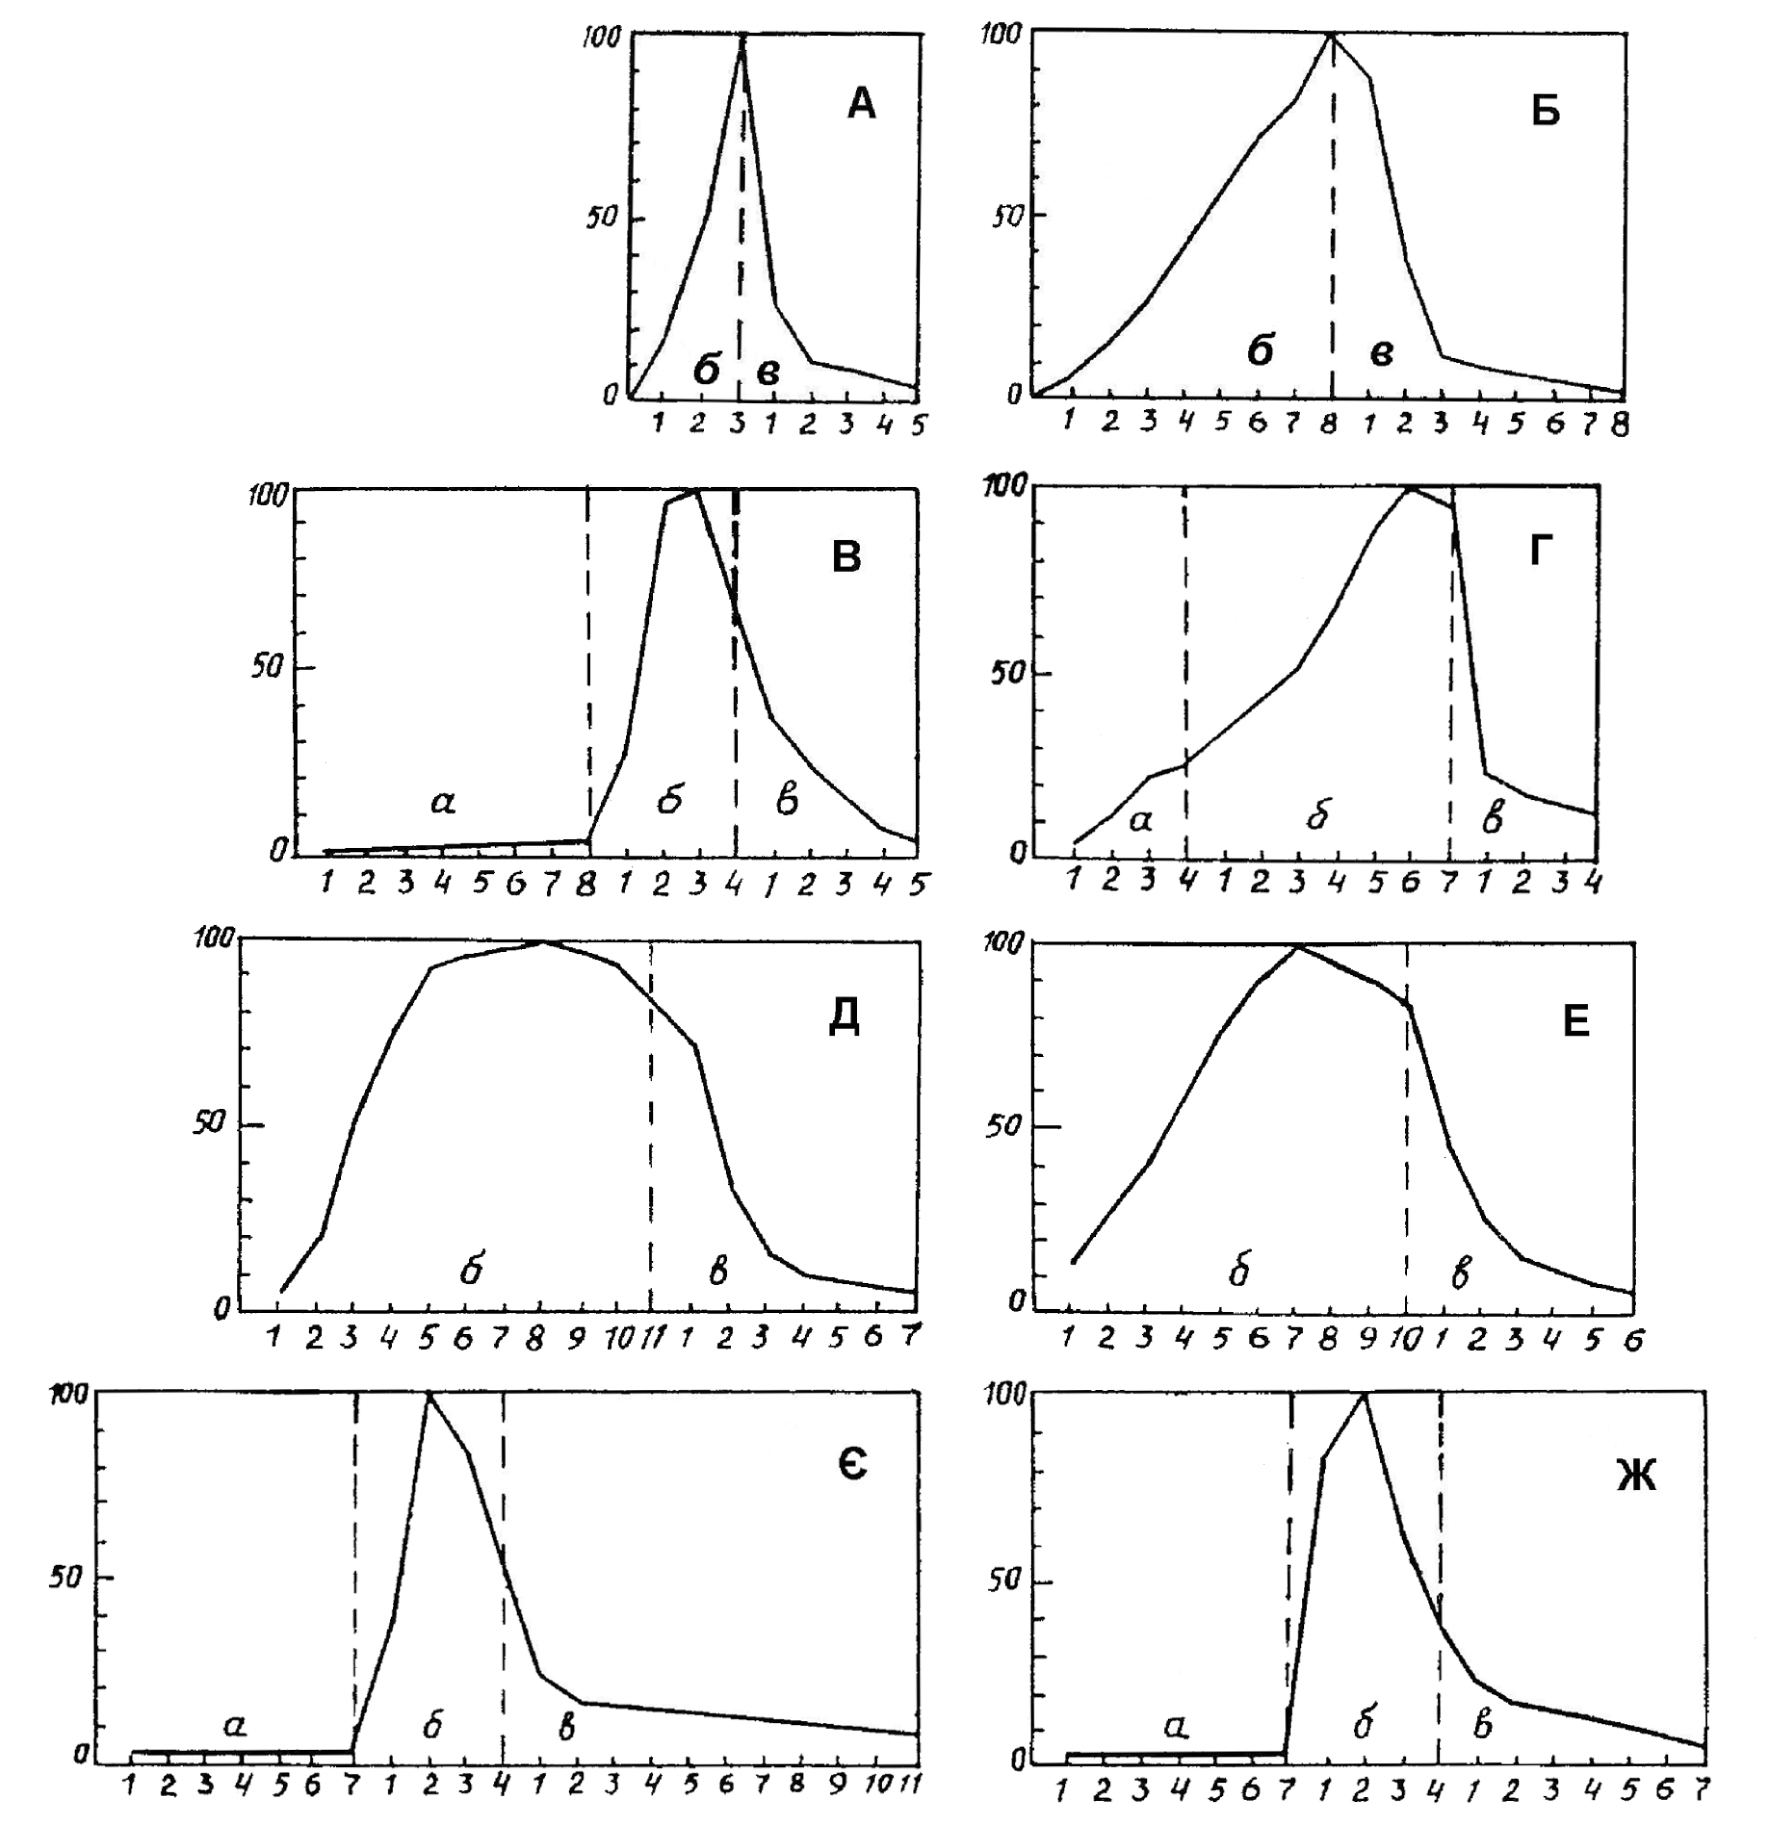 Fig. 1. One-vertex model plots of the change of length of internodes along the axis of monocarpic shoot with maximum in prefloral zone for Lamiaceae species (subtype A). Plant species: A – Thymus pulcherrimus; Б – Th. alpestris; В – Melittis sarmatica; Г – Prunella grandiflora; Д – Thymus pallasianus; Е – Th. serpyllum; Є – Salvia pratensis; Ж – Phlomis tuberosа. Shoot zones: а – basal; б – prefloral; в – floral; X-axis – numbers of internodes in shoot zones; Y-axis – length of the internodes (in % from its maximal value).